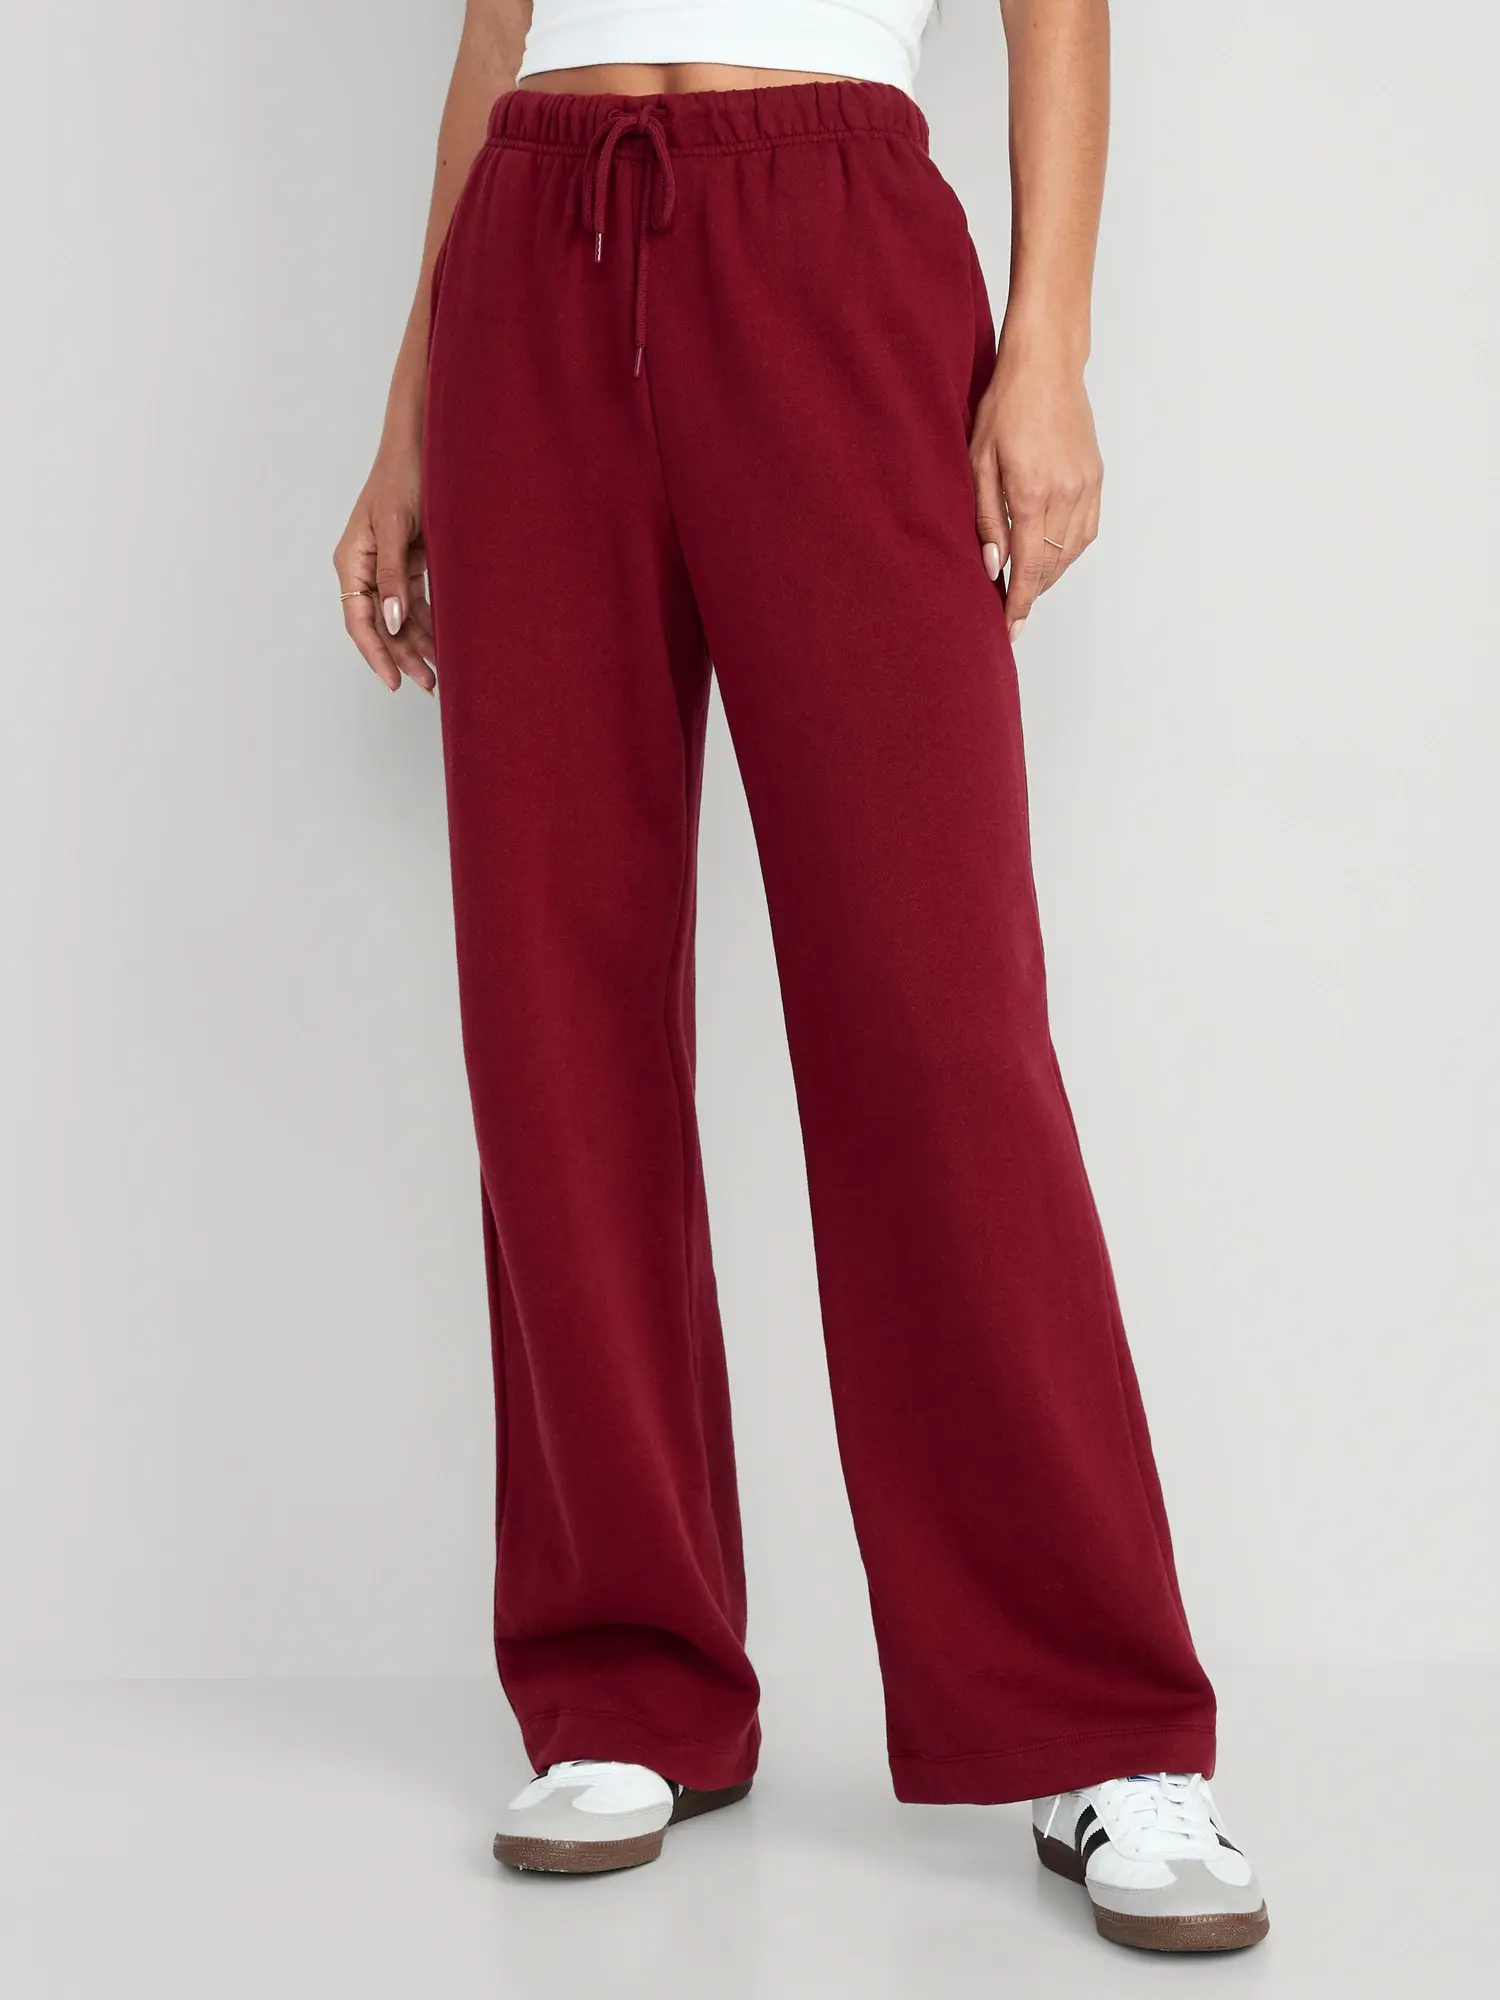 Old Navy Extra High-Waisted Vintage Straight Lounge Sweatpants for Women red. 1